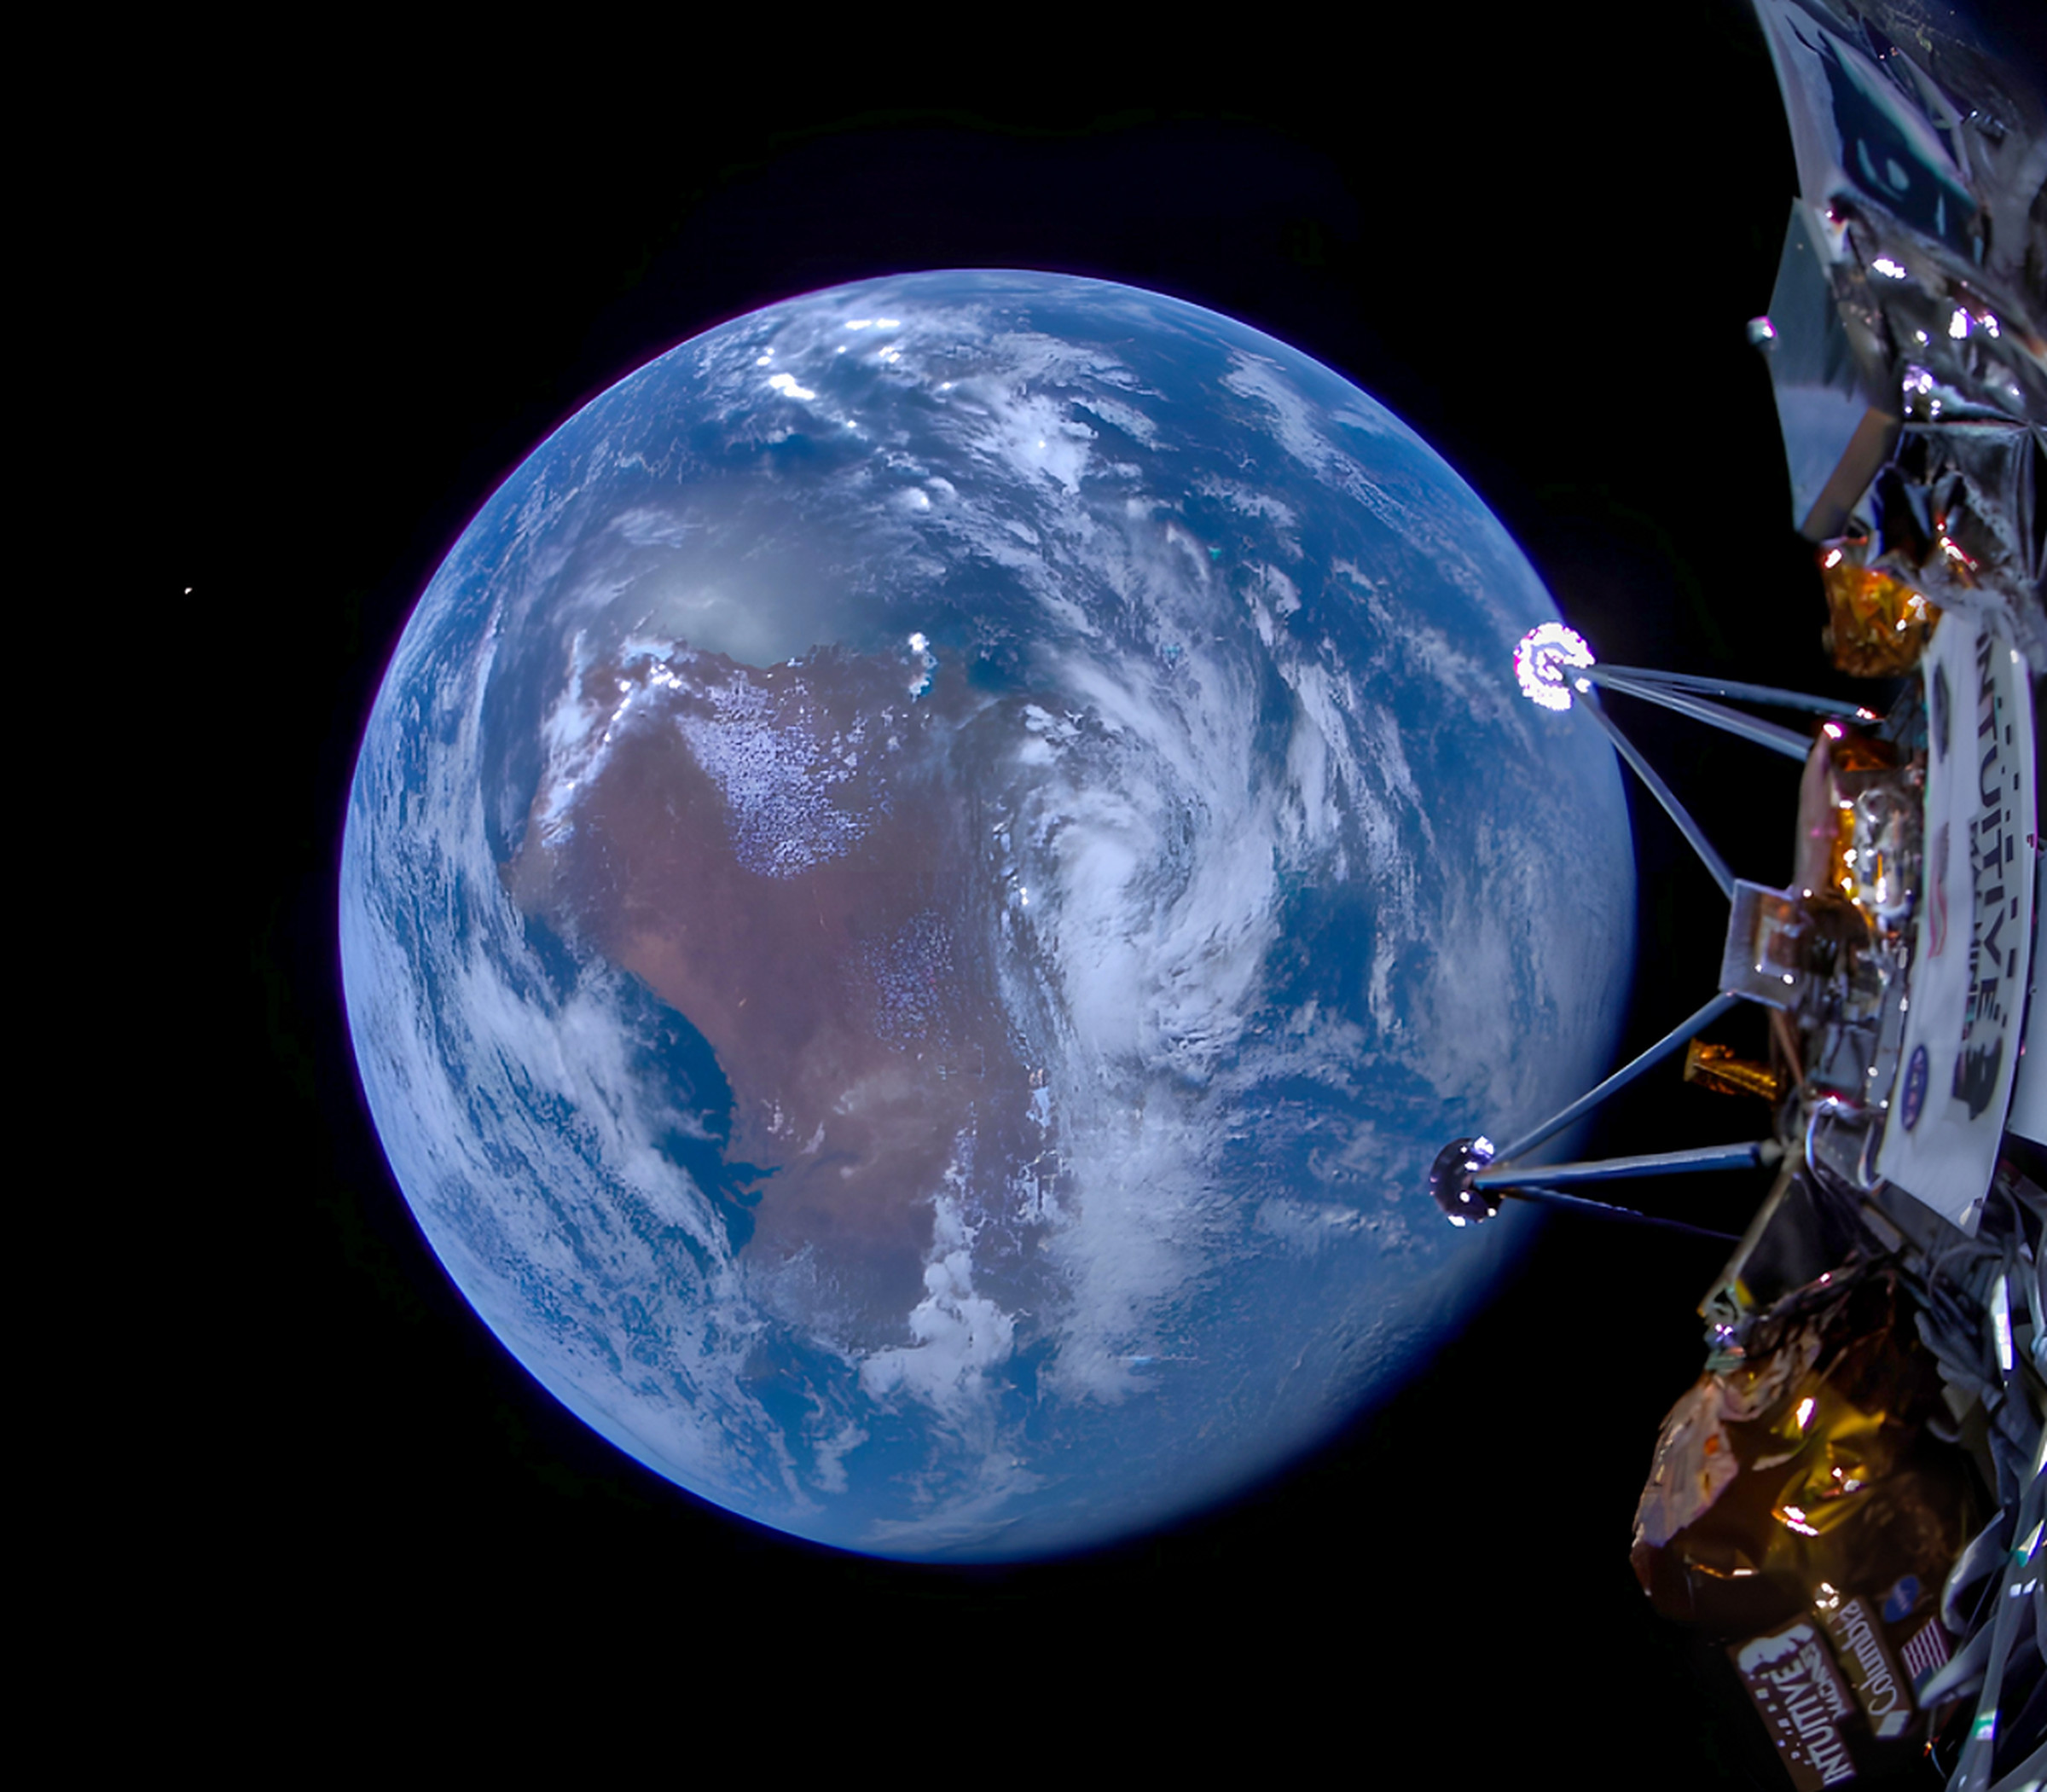 A picture of the Earth, with the legs of the Odysseus craft in view in the right side of the frame.